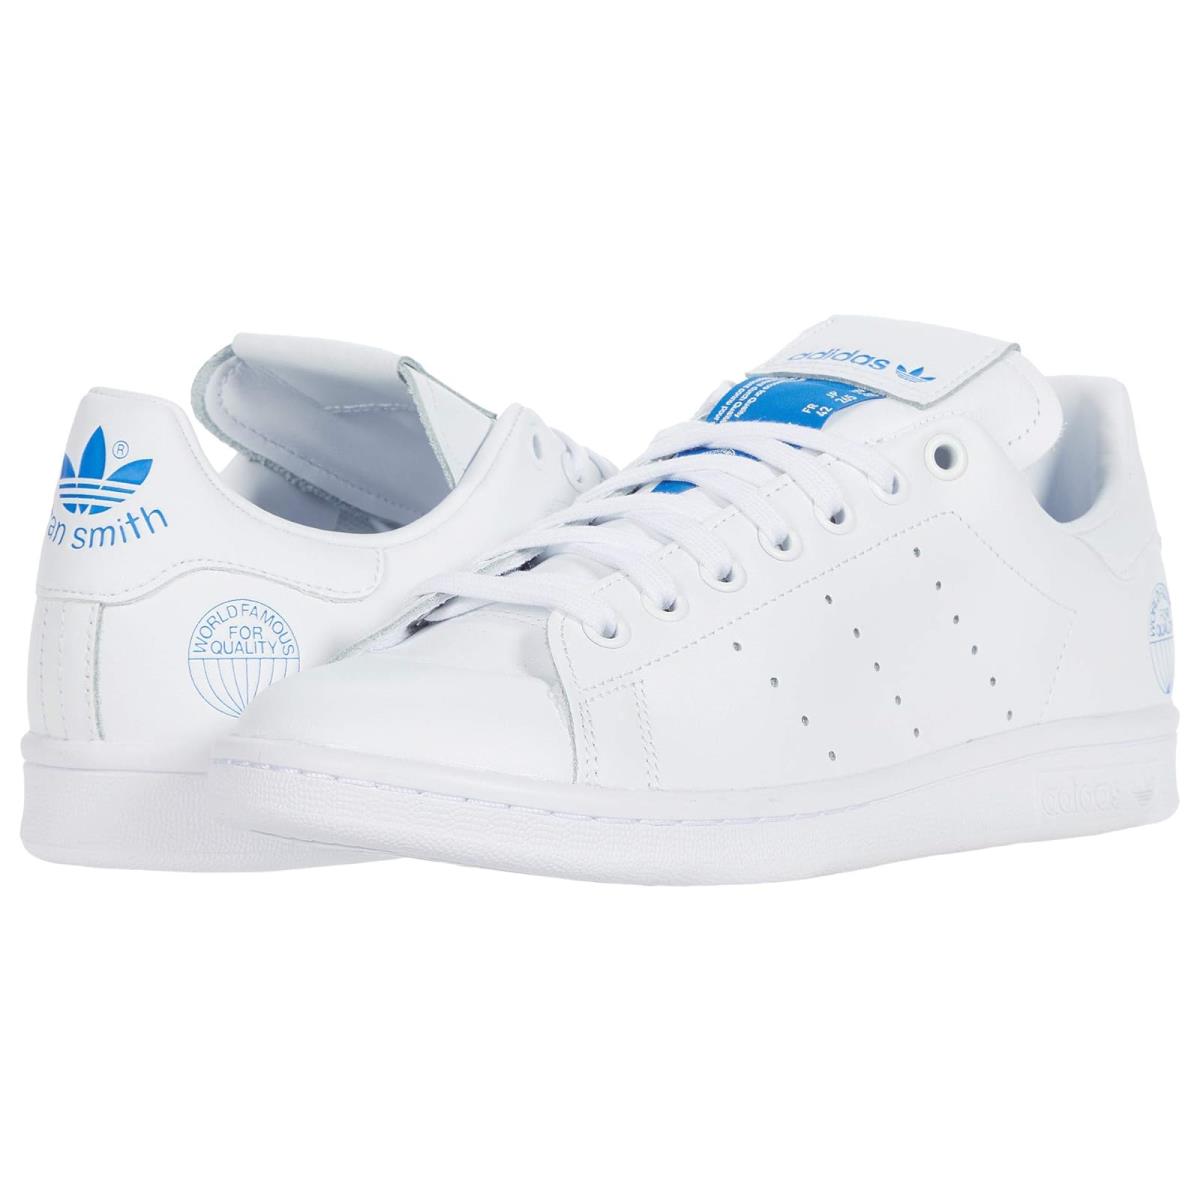 Man`s Sneakers Athletic Shoes Adidas Originals Stan Smith Footwear White/Footwear White/Bluebird